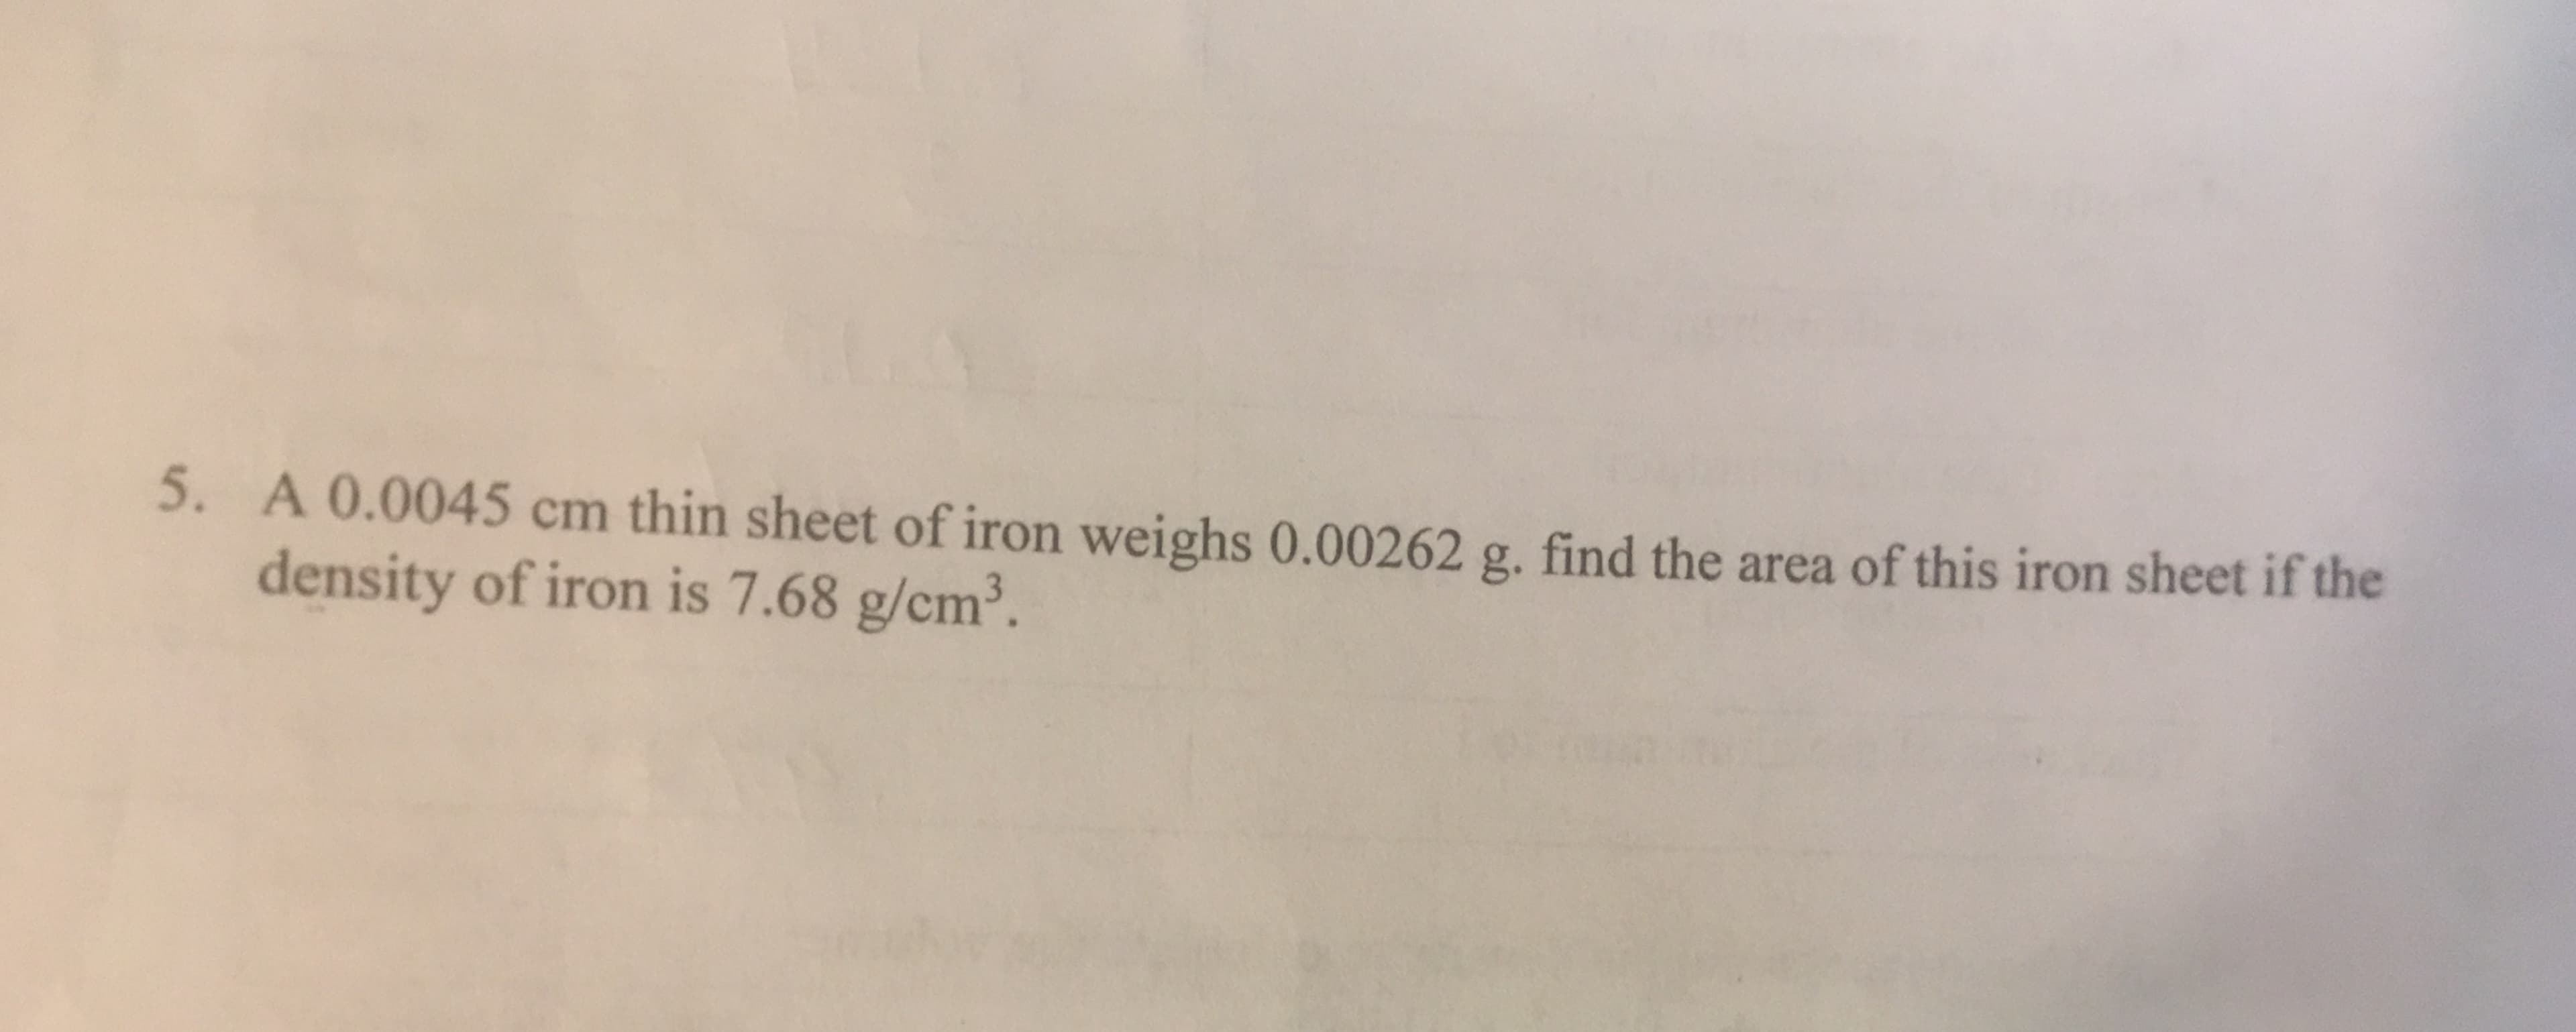 A 0.0045 cm thin sheet of iron weighs 0.00262 g. find the area of this iron sheet if the
density of iron is 7.68 g/cm3.
5.
